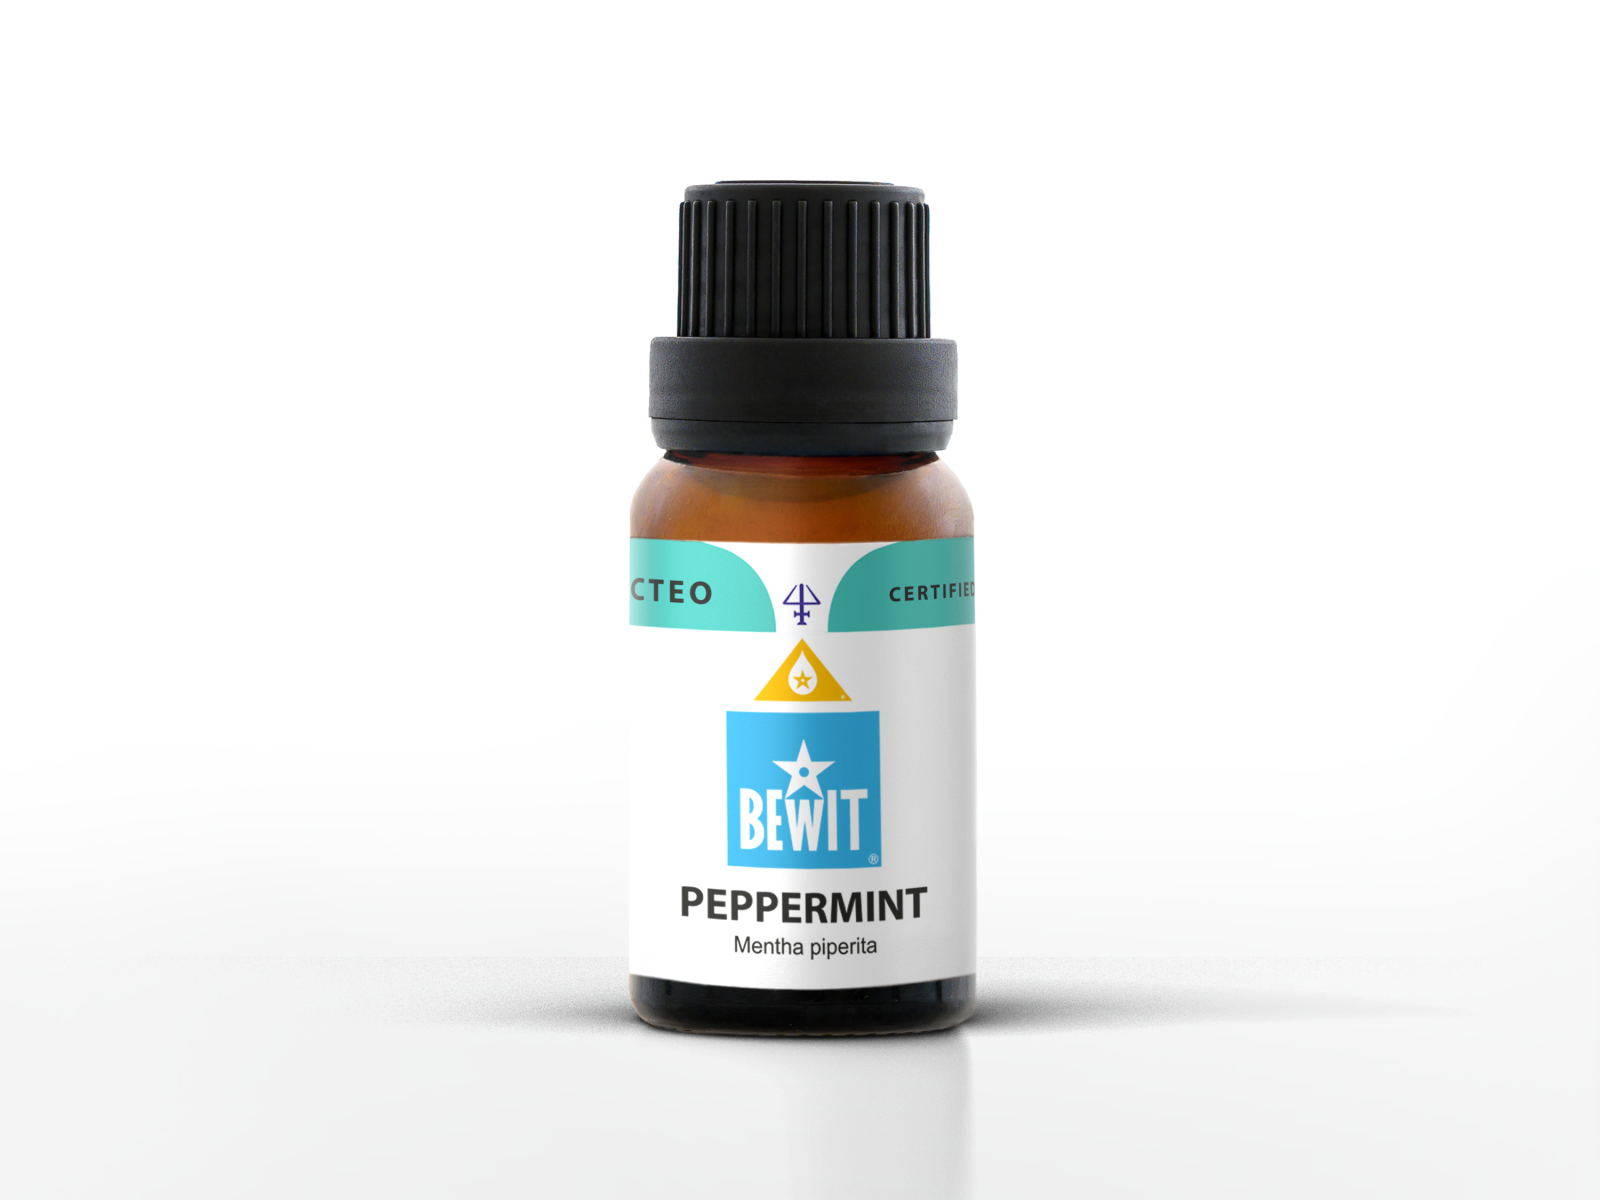 BEWIT Peppermint - 100% pure and natural CTEO® essential oil - 2